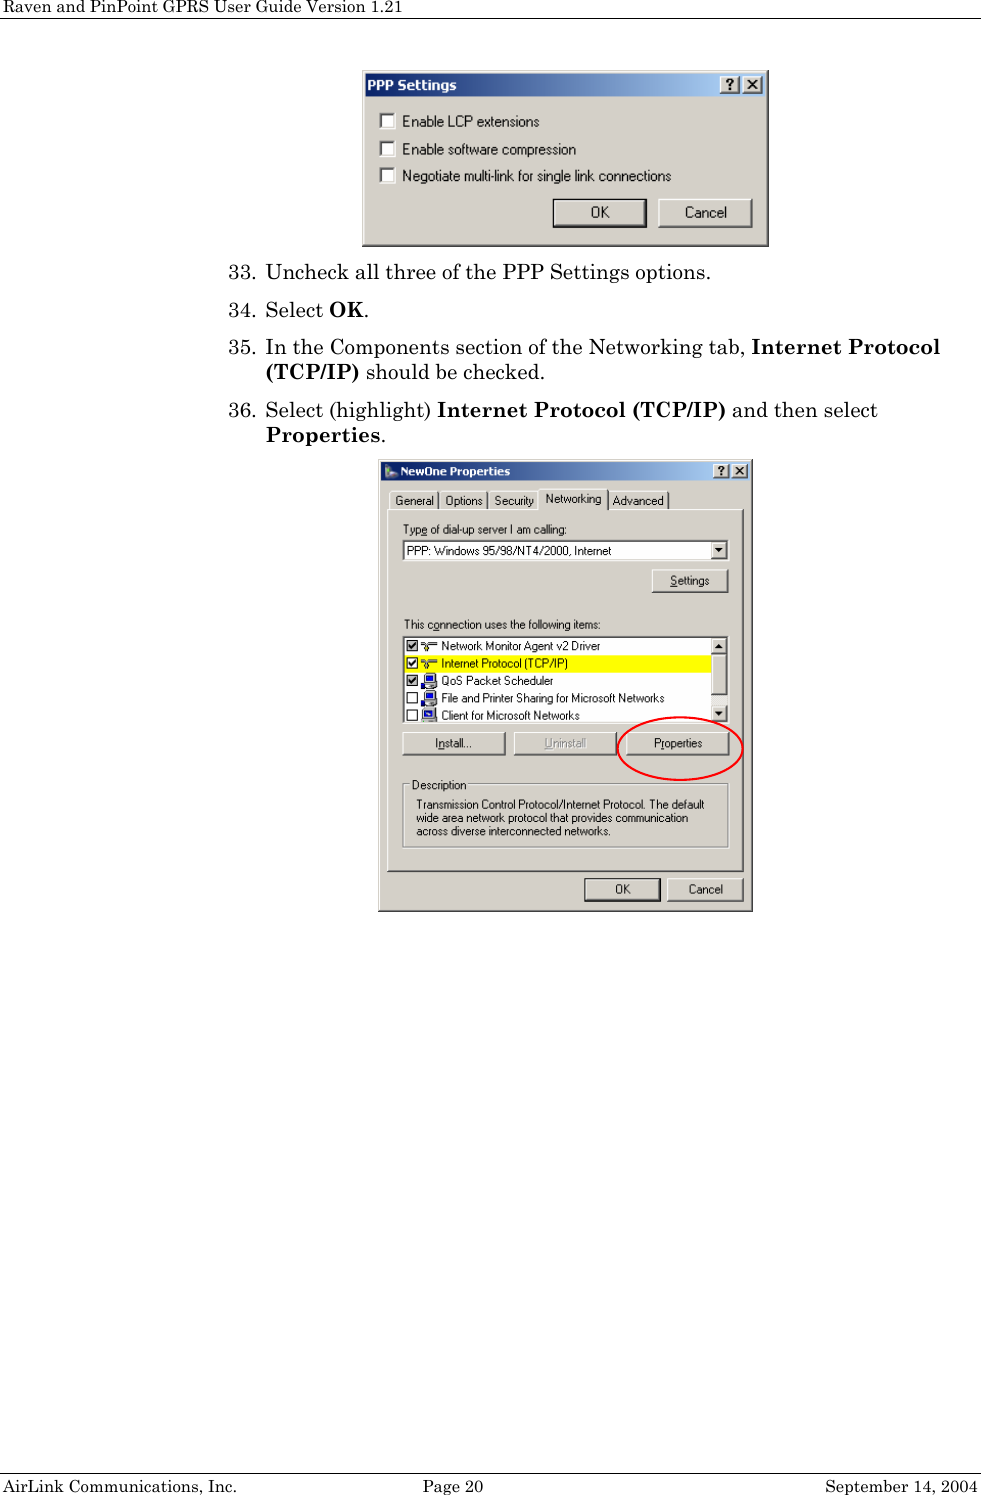 Raven and PinPoint GPRS User Guide Version 1.21  33. Uncheck all three of the PPP Settings options. 34. Select OK. 35. In the Components section of the Networking tab, Internet Protocol (TCP/IP) should be checked. 36. Select (highlight) Internet Protocol (TCP/IP) and then select Properties.   AirLink Communications, Inc.  Page 20  September 14, 2004 